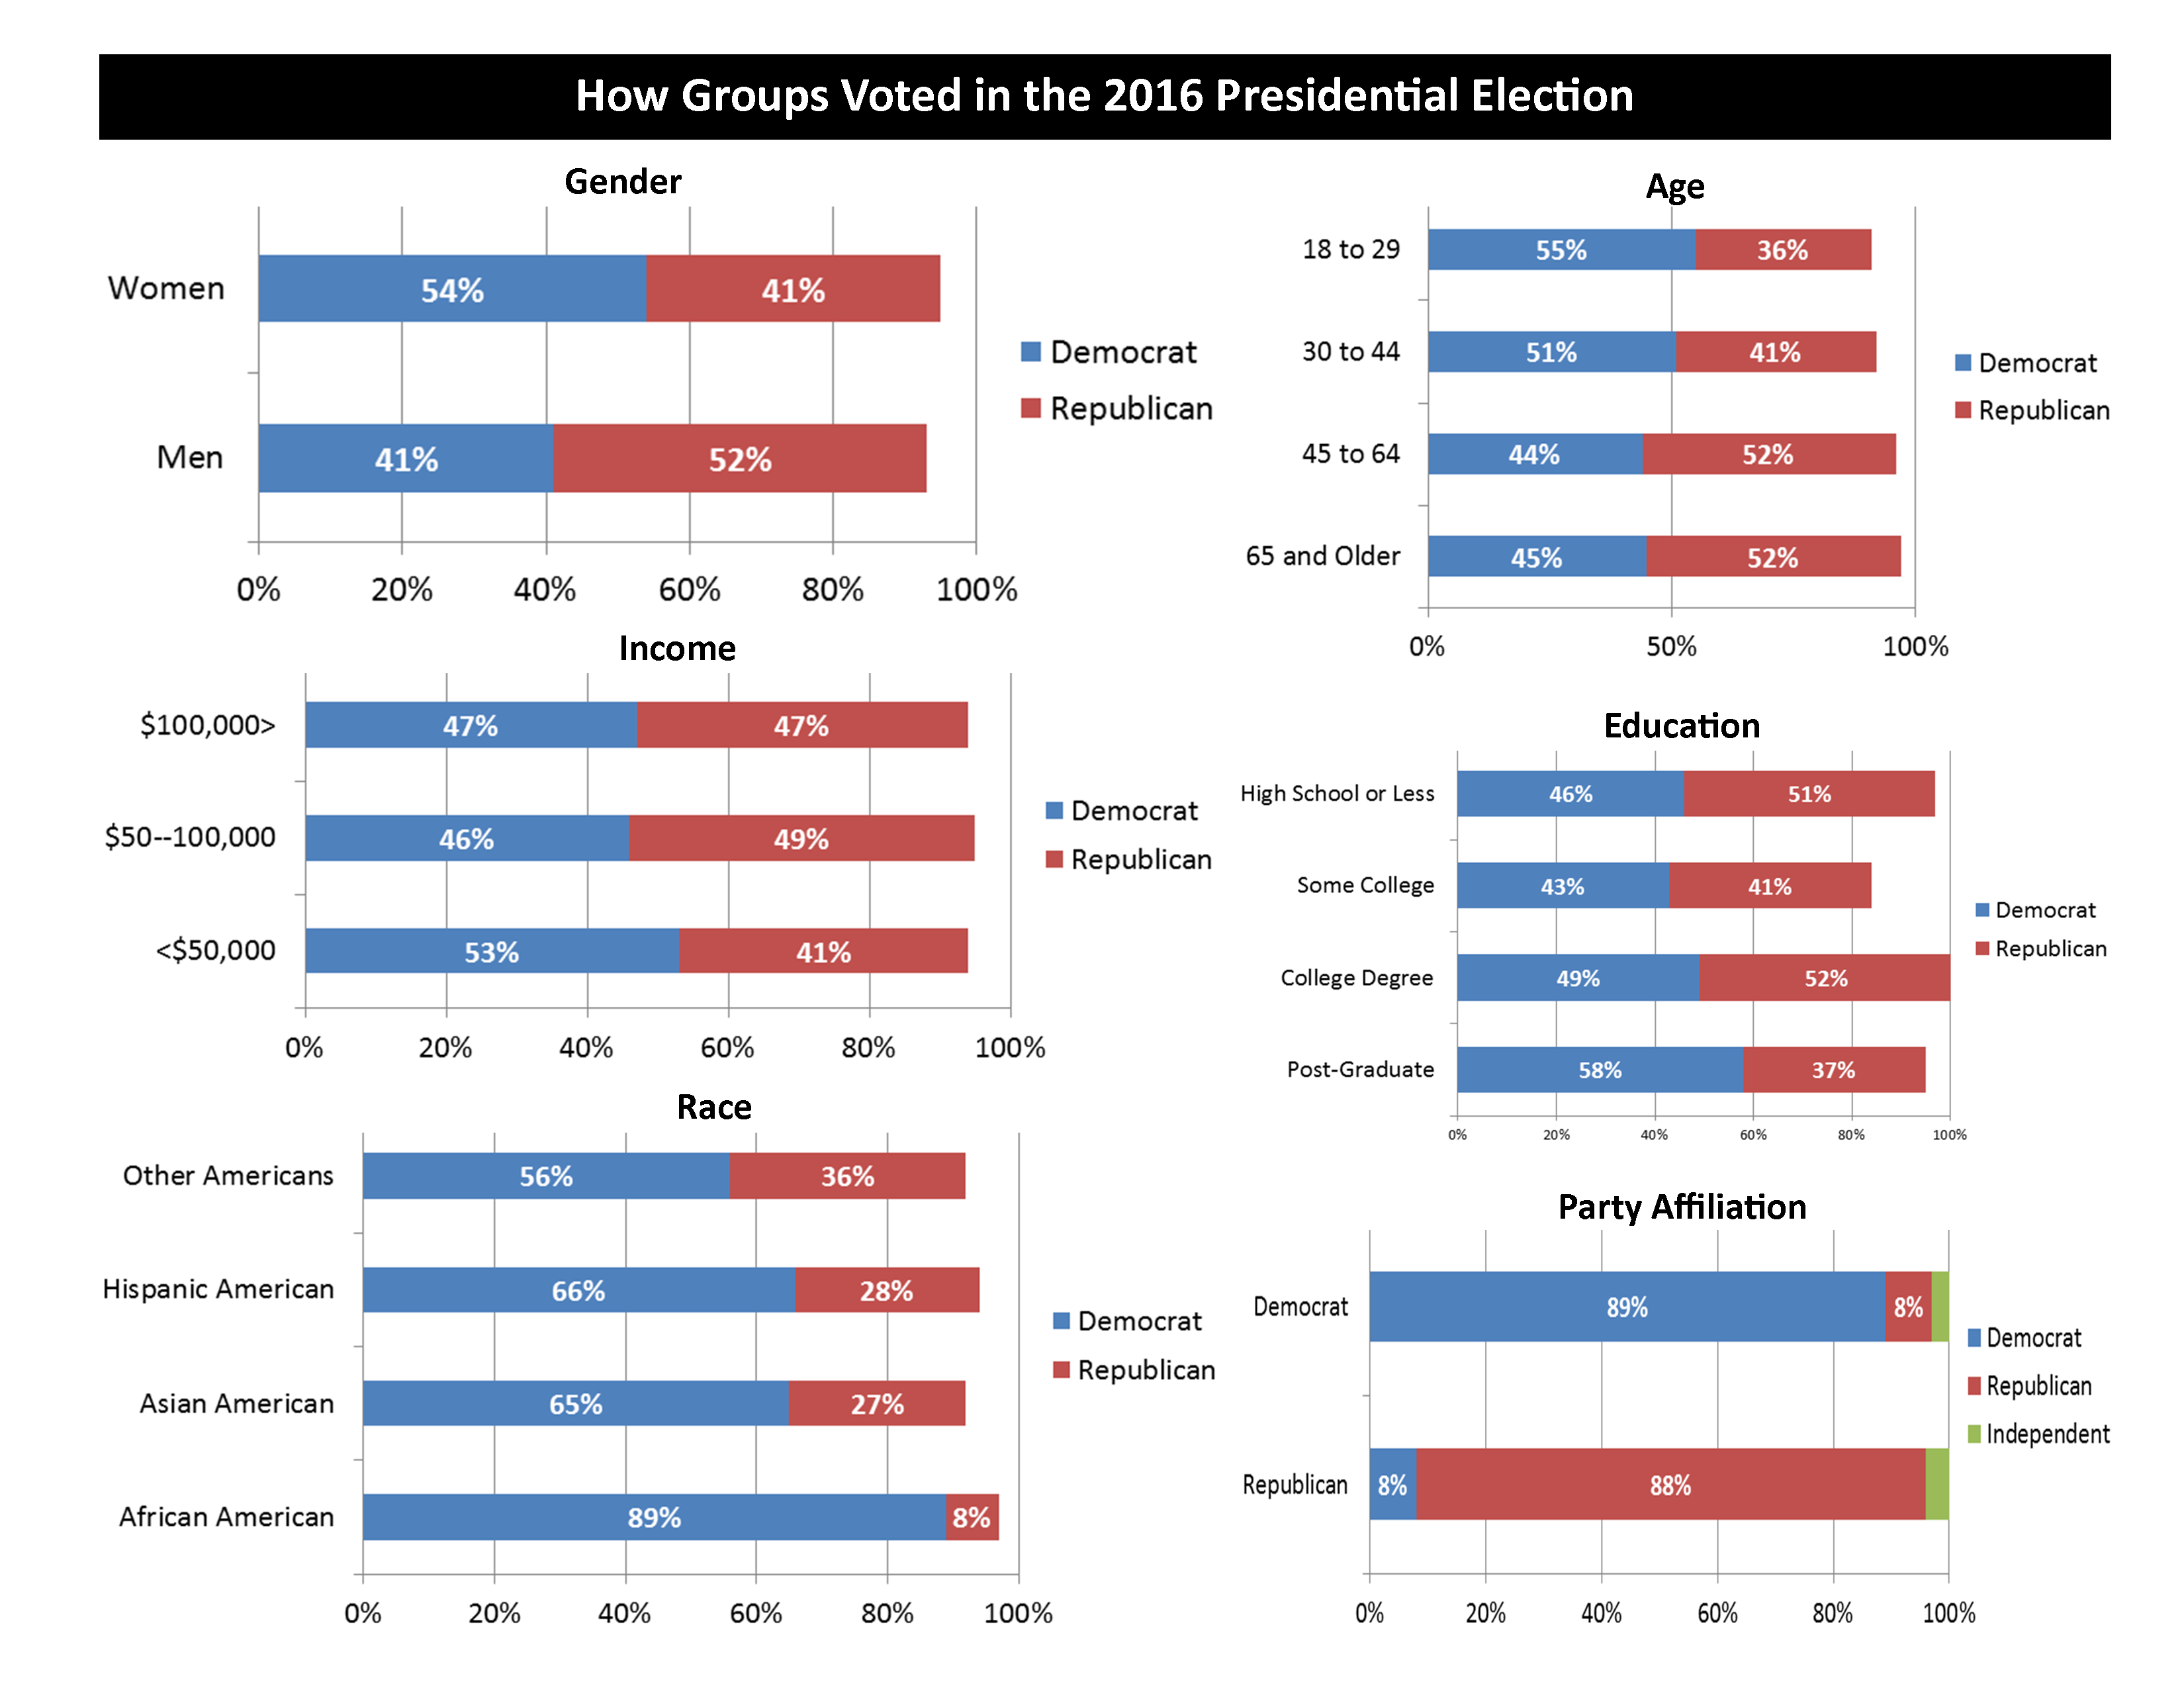 Set of bar graphs illustrating how various groups voted in the 2016 election including breakouts for gender, income, race, age, education, and party affiliation.